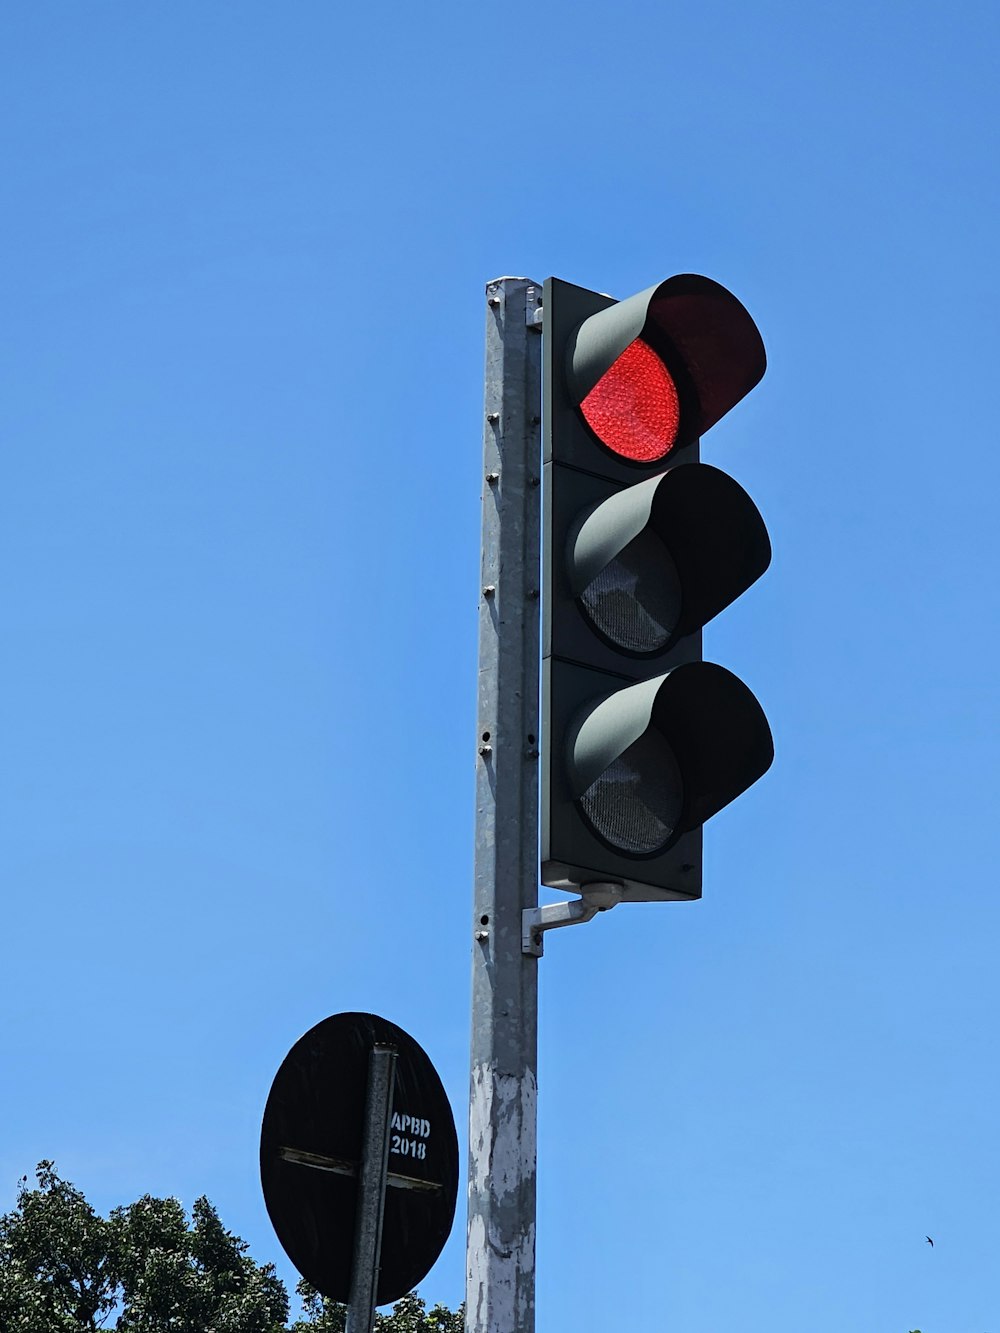 a traffic light on a pole with a blue sky in the background